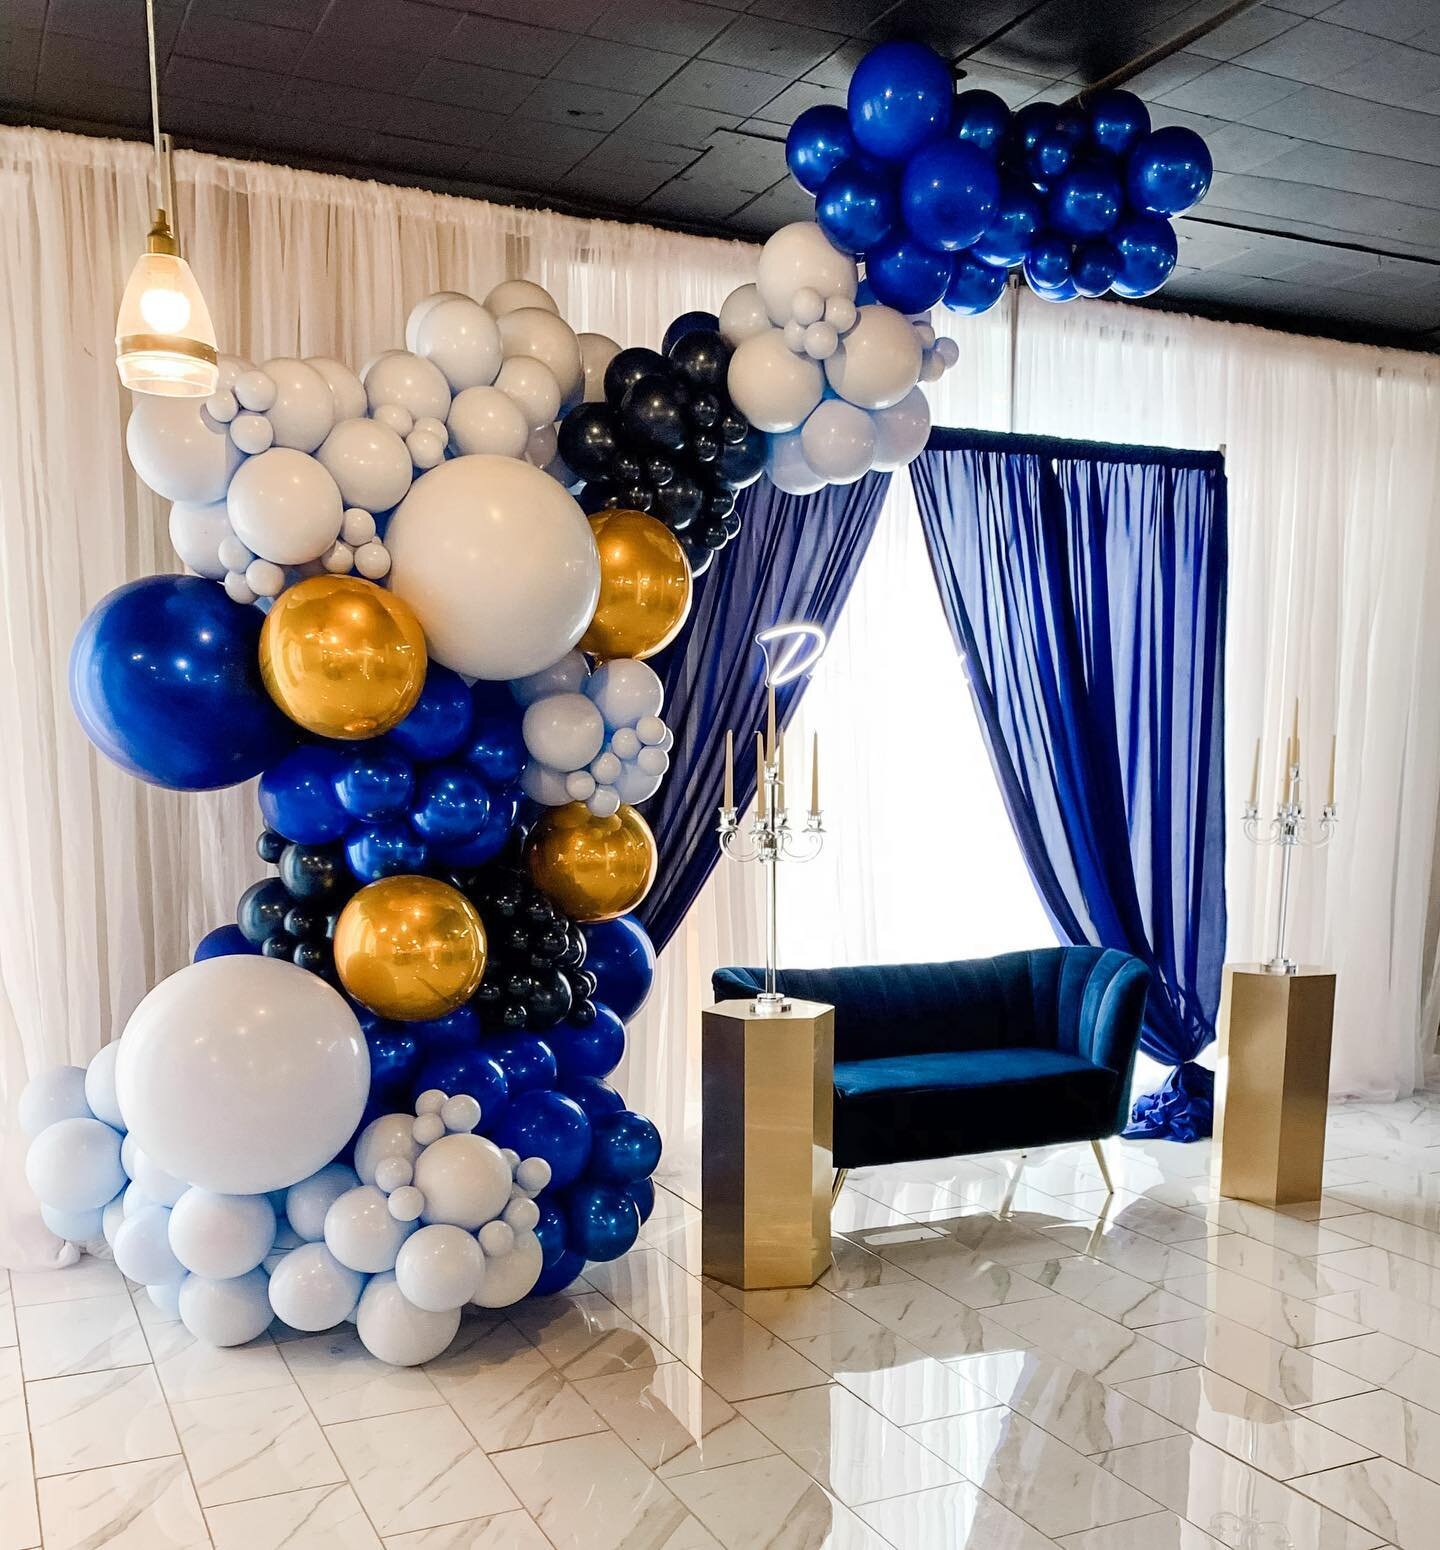 They say its just balloons... We say that it is art! 

𝙴𝚟𝚎𝚗𝚝 𝚍𝚎𝚜𝚒𝚐𝚗𝚎𝚛: @abeautifulevent_ 
𝙱𝚊𝚕𝚕𝚘𝚘𝚗𝚜: 𝙱𝚊𝚋𝚊𝚕𝚘𝚘𝚗𝚣 𝙱𝚊𝚕𝚕𝚘𝚘𝚗𝚜 

#mississippiballoonartist #babaloonz #birthdaygarland #organicballoonarch #staircasegarland